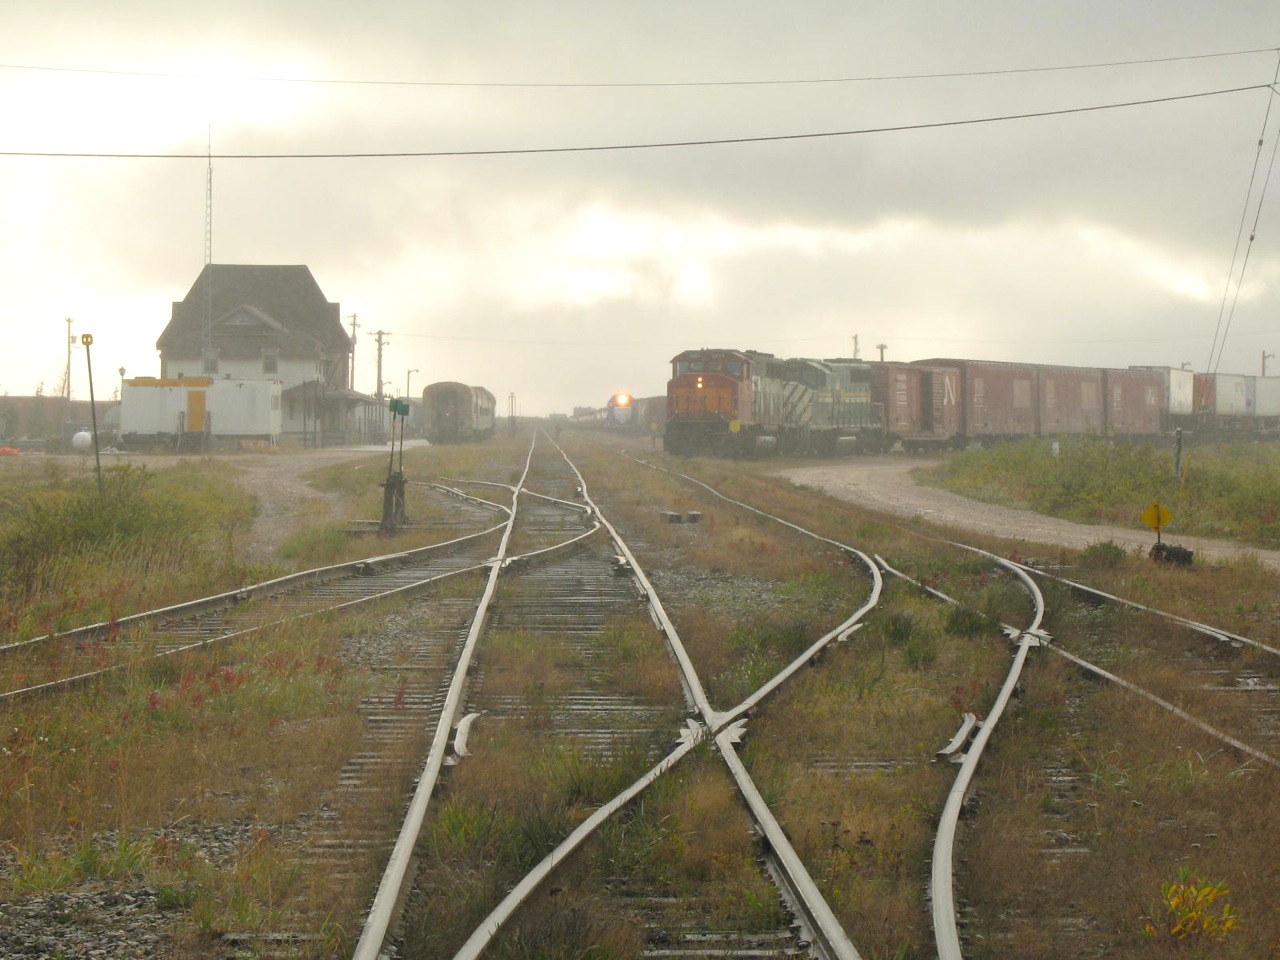 At the end of Hudson Bay Railway's Herchmer Subdivision lies Churchill, Manitoba. At left VIA's Hudson Bay sits at the station having wye'd before it's arrival with passengers on board. The passenger train will head south later in the evening. On the right is the recently arrived general mixed freight train from Thompson which has likely made several stops along the way. This train carried a 1919 vintage heavyweight combination coach/baggage until late 2000 painted in VIA colours. The true mixed train status was finally dropped with all passengers being accommodated on VIA #692 and #693. The headlight seen behind is GATX 2683 and its crew waiting to resume their duties of switching grain cars to be off-loaded at the nearby port destined for export to foreign markets.